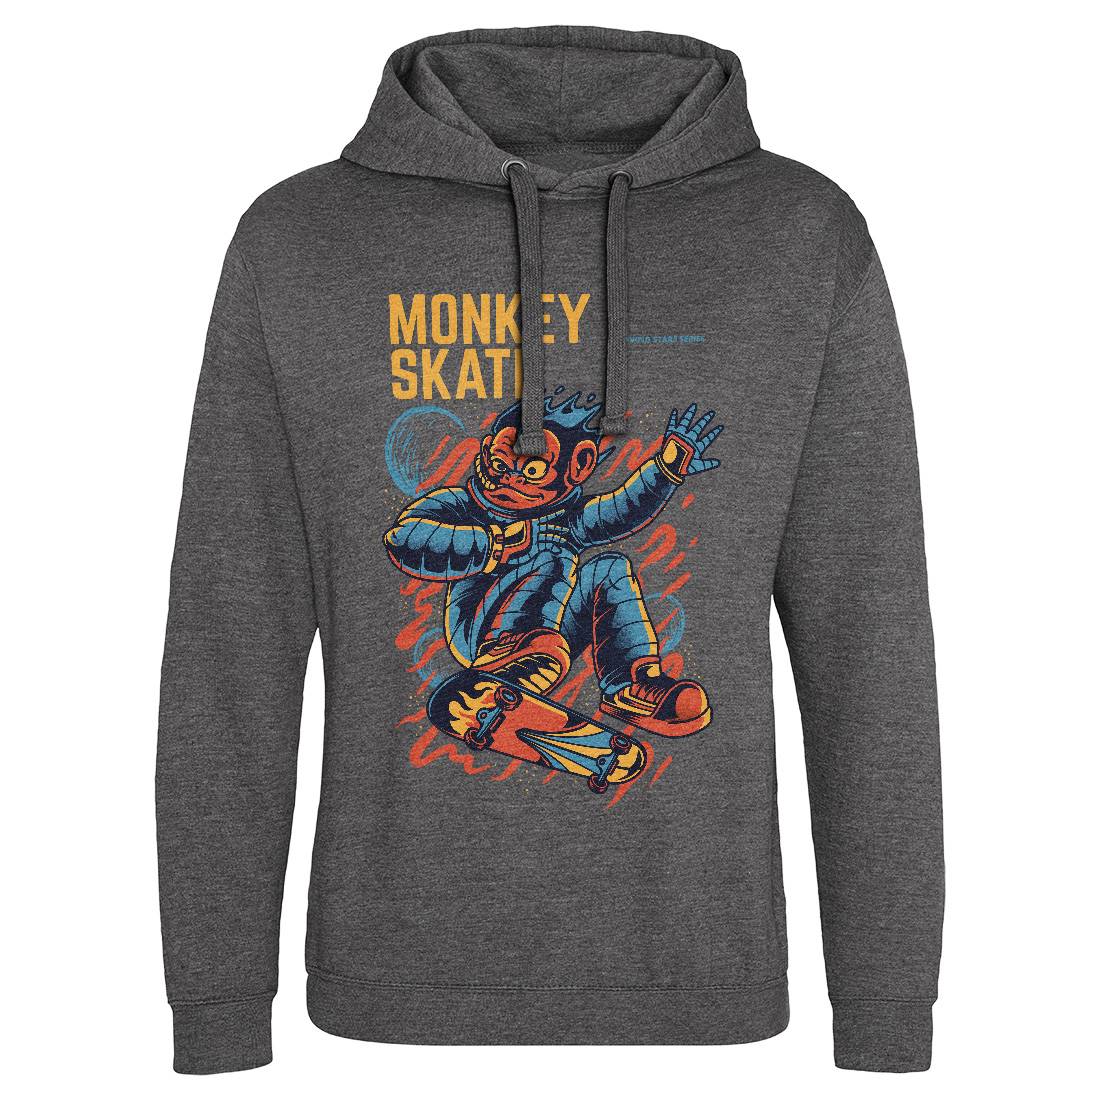 Monkey Mens Hoodie Without Pocket Skate D814